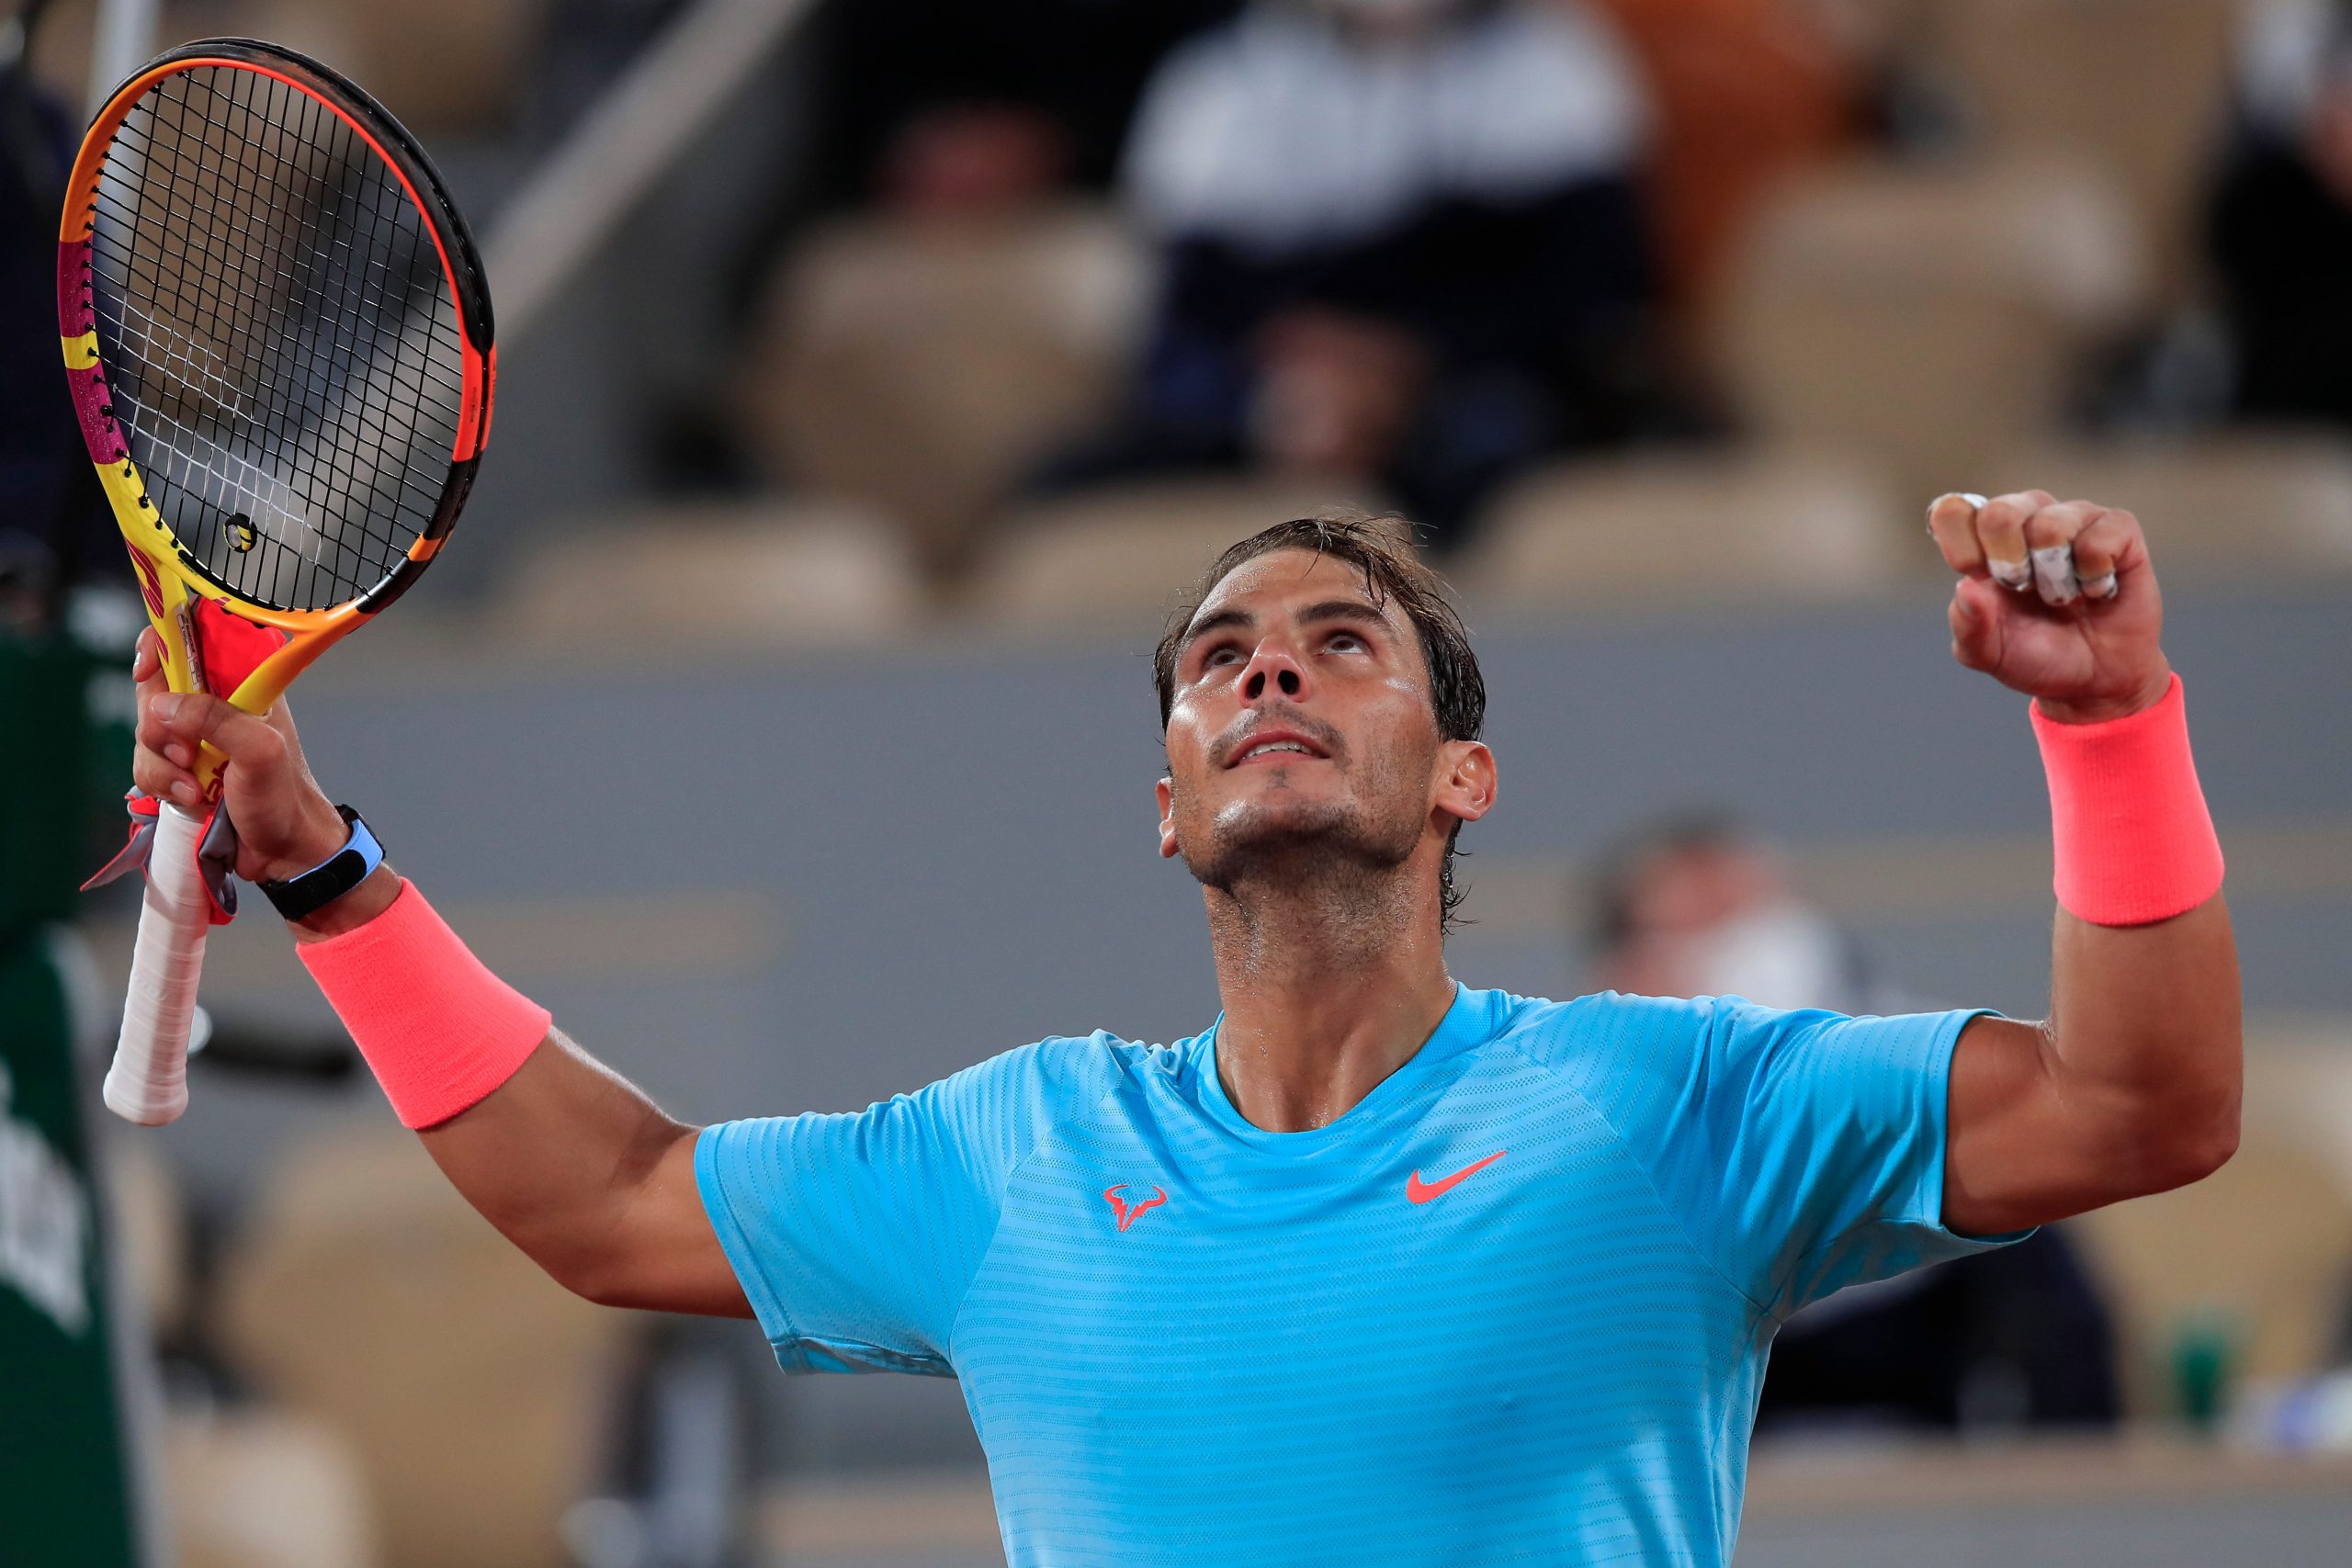 French Open 2020: Rafael Nadal breezes into last 16, on track to 20th Grand Slam